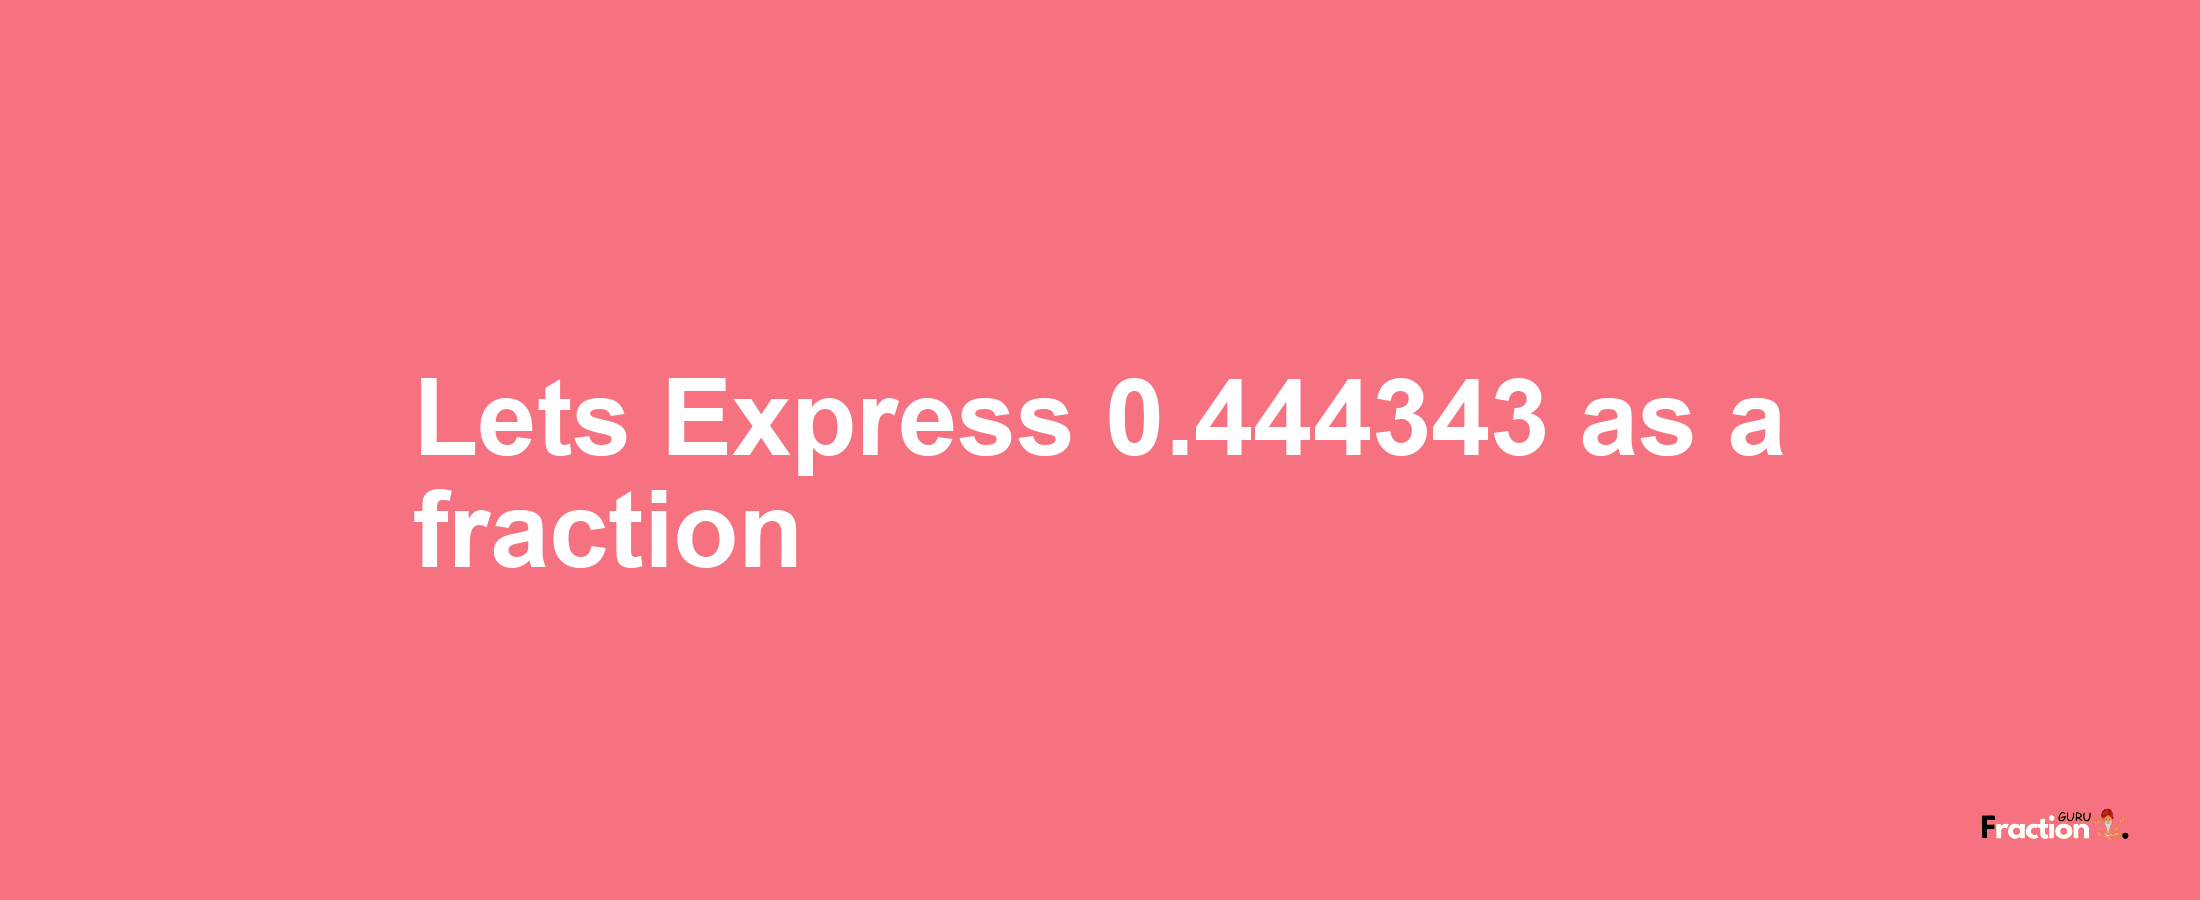 Lets Express 0.444343 as afraction